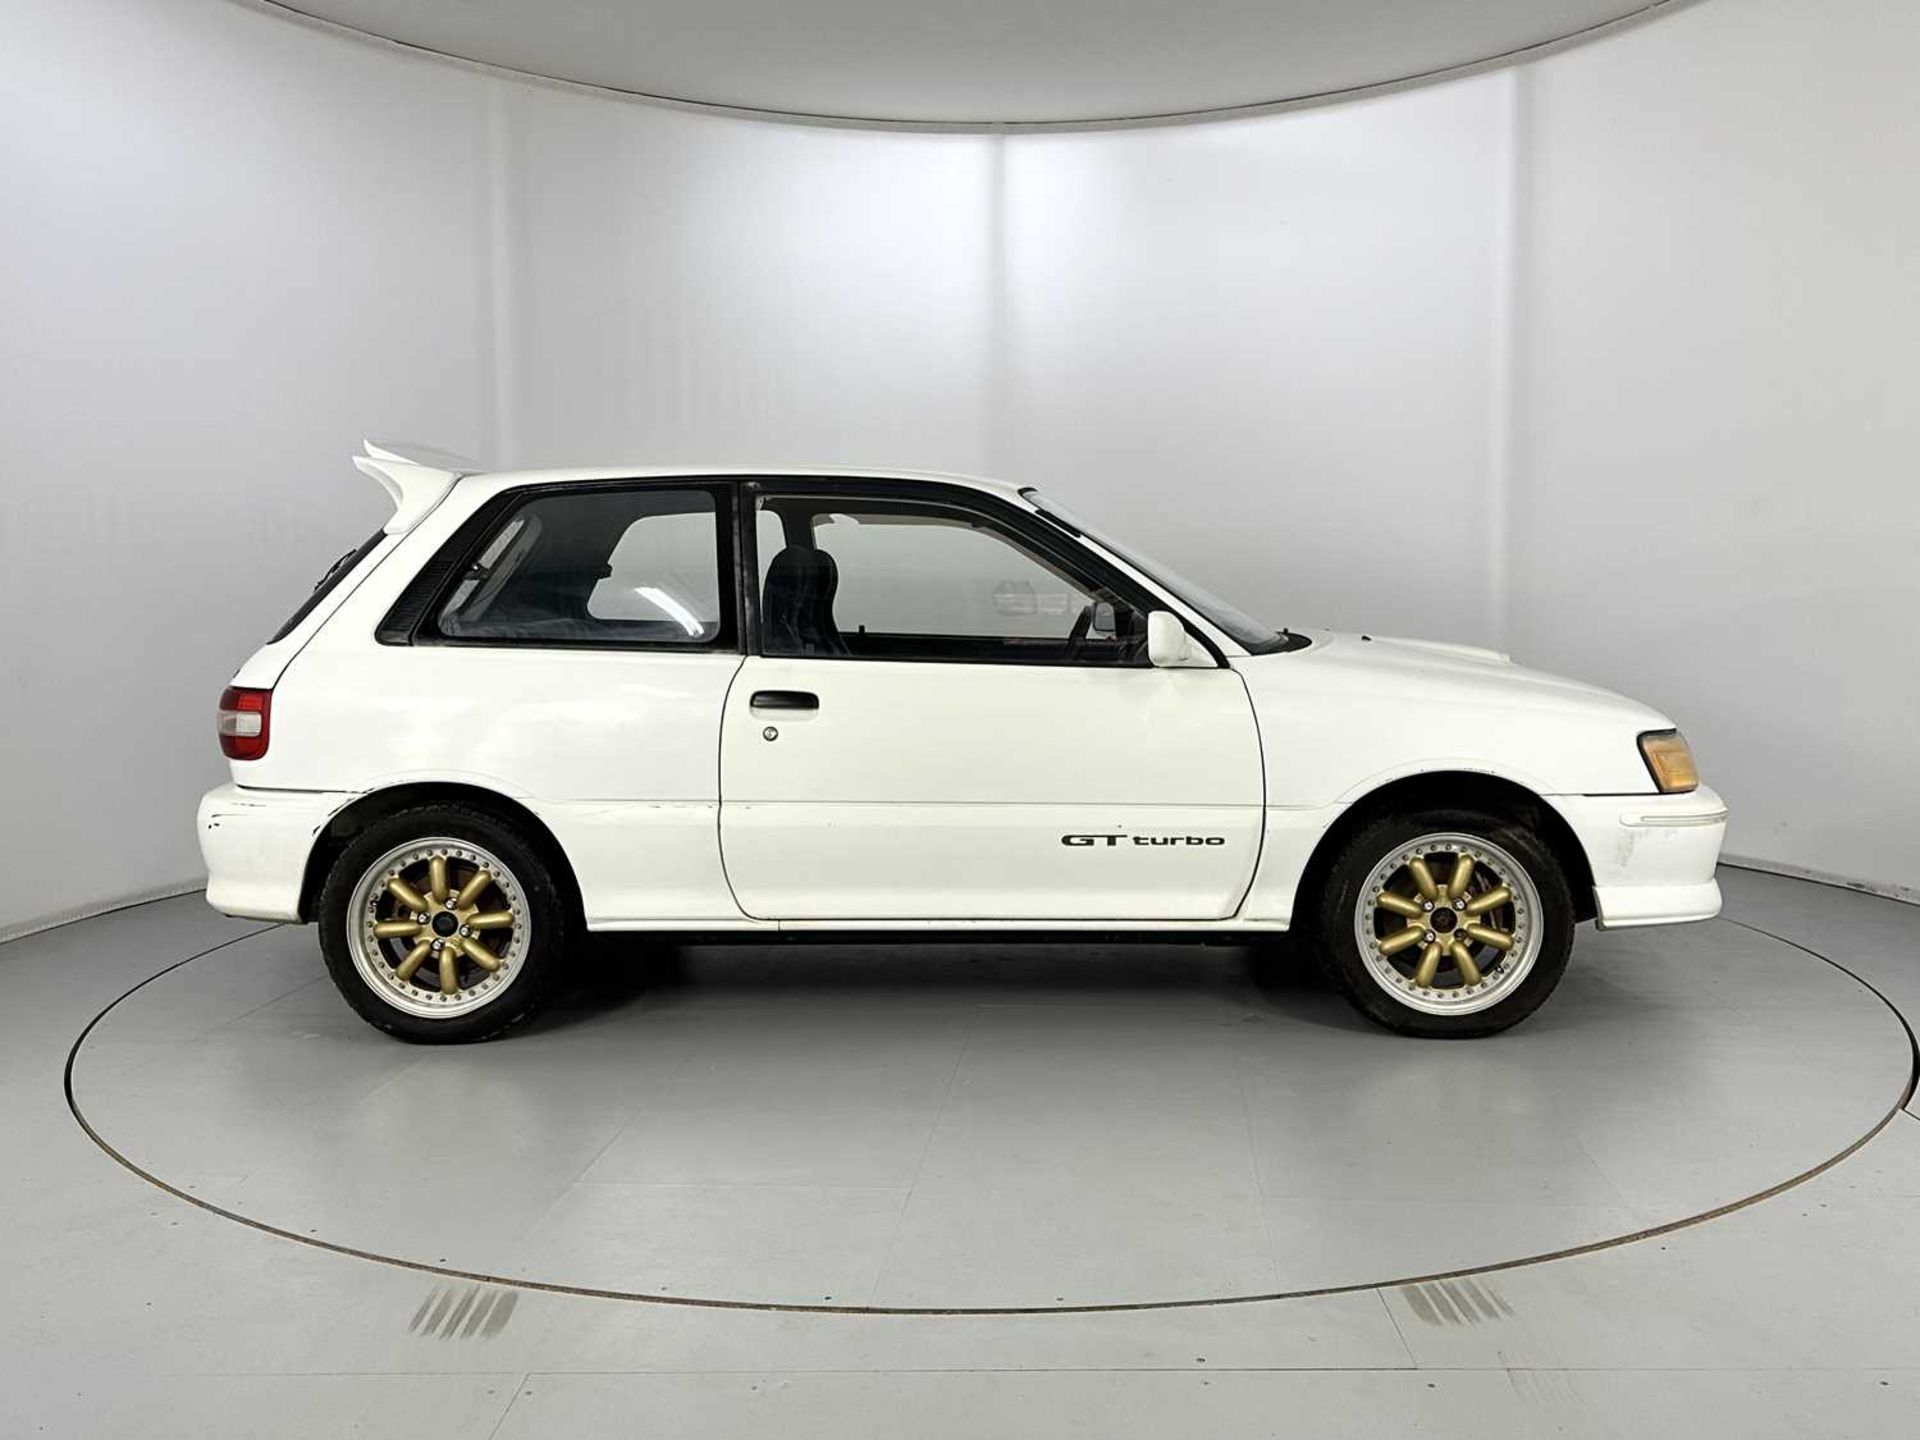 1990 Toyota Starlet GT Turbo - Image 11 of 29